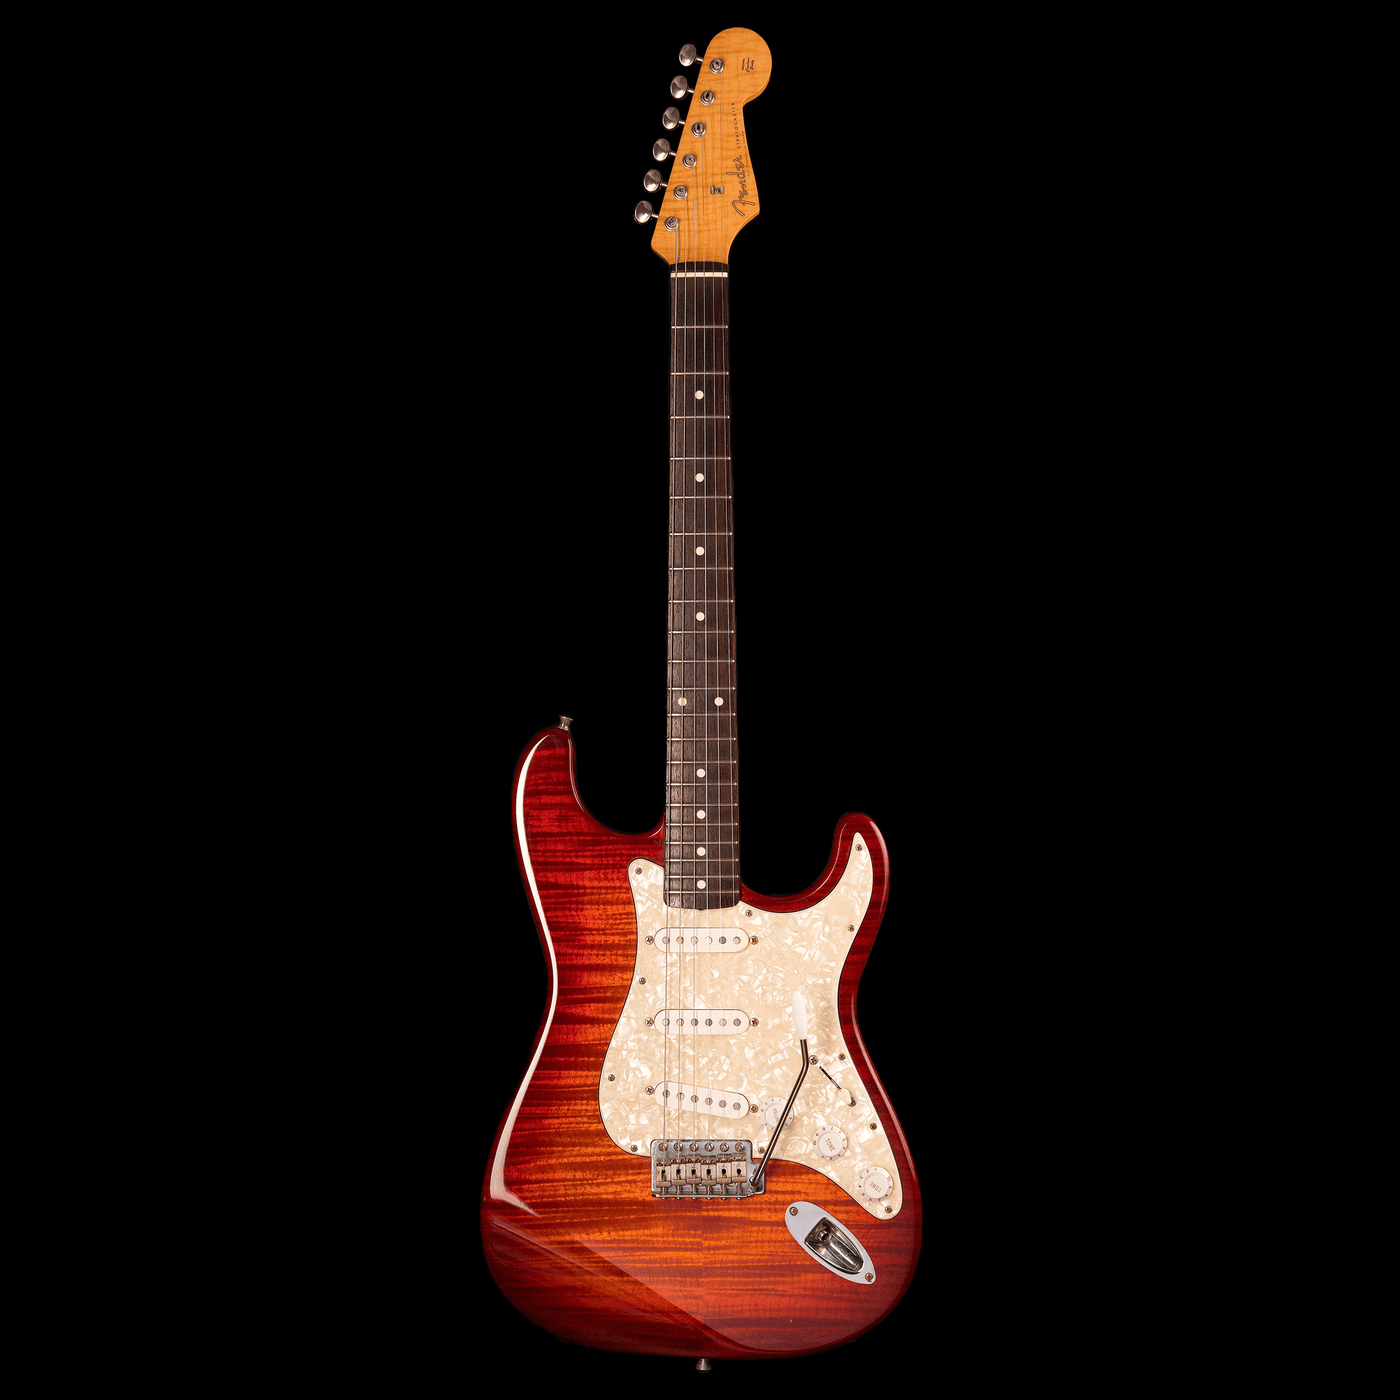 Fender Stratocaster Foto Flame Cherryburst MIJ 1995 - $1699990 - Gearhub - From blistering British Invasion beginnings through a long and acclaimed solo career of remarkable stylistic versatility, Jeff Beck has taken the Stratocaster to unbelievable sonic heights, with one of the most distinctive musical voices ever coaxed from the instrument. With classic style and special features, make his sound and style your own with the Jeff Beck Stratocaster, which ranks among Fender's most popular and longstanding a